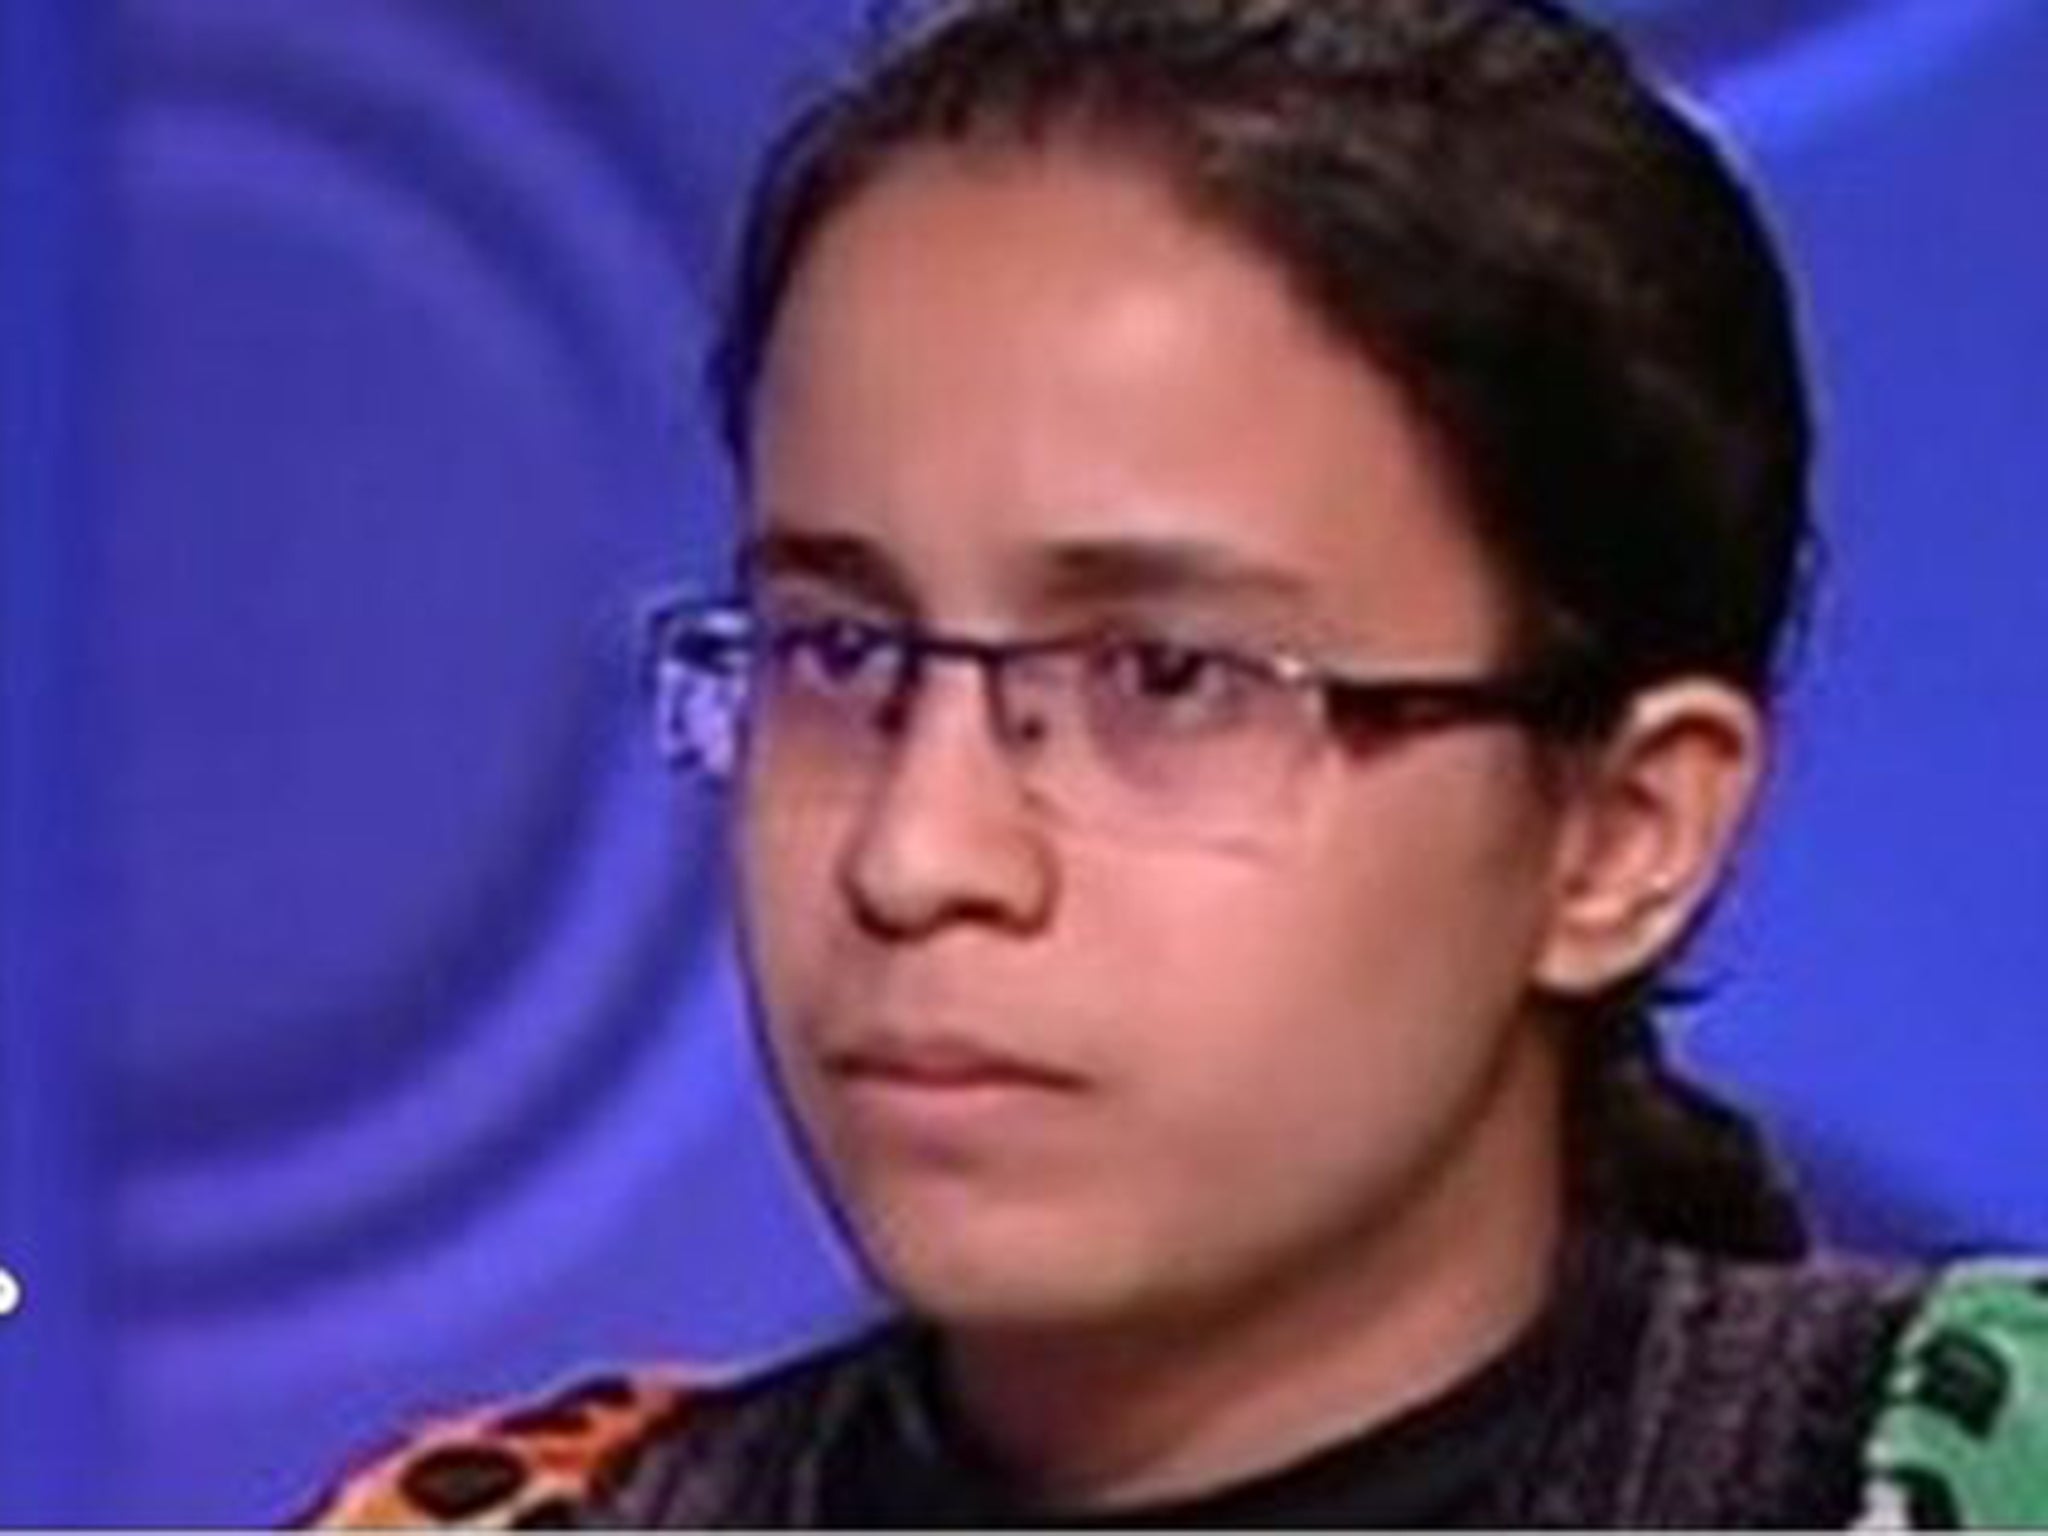 Mariam Malak is one of Egypt’s top performing high school students